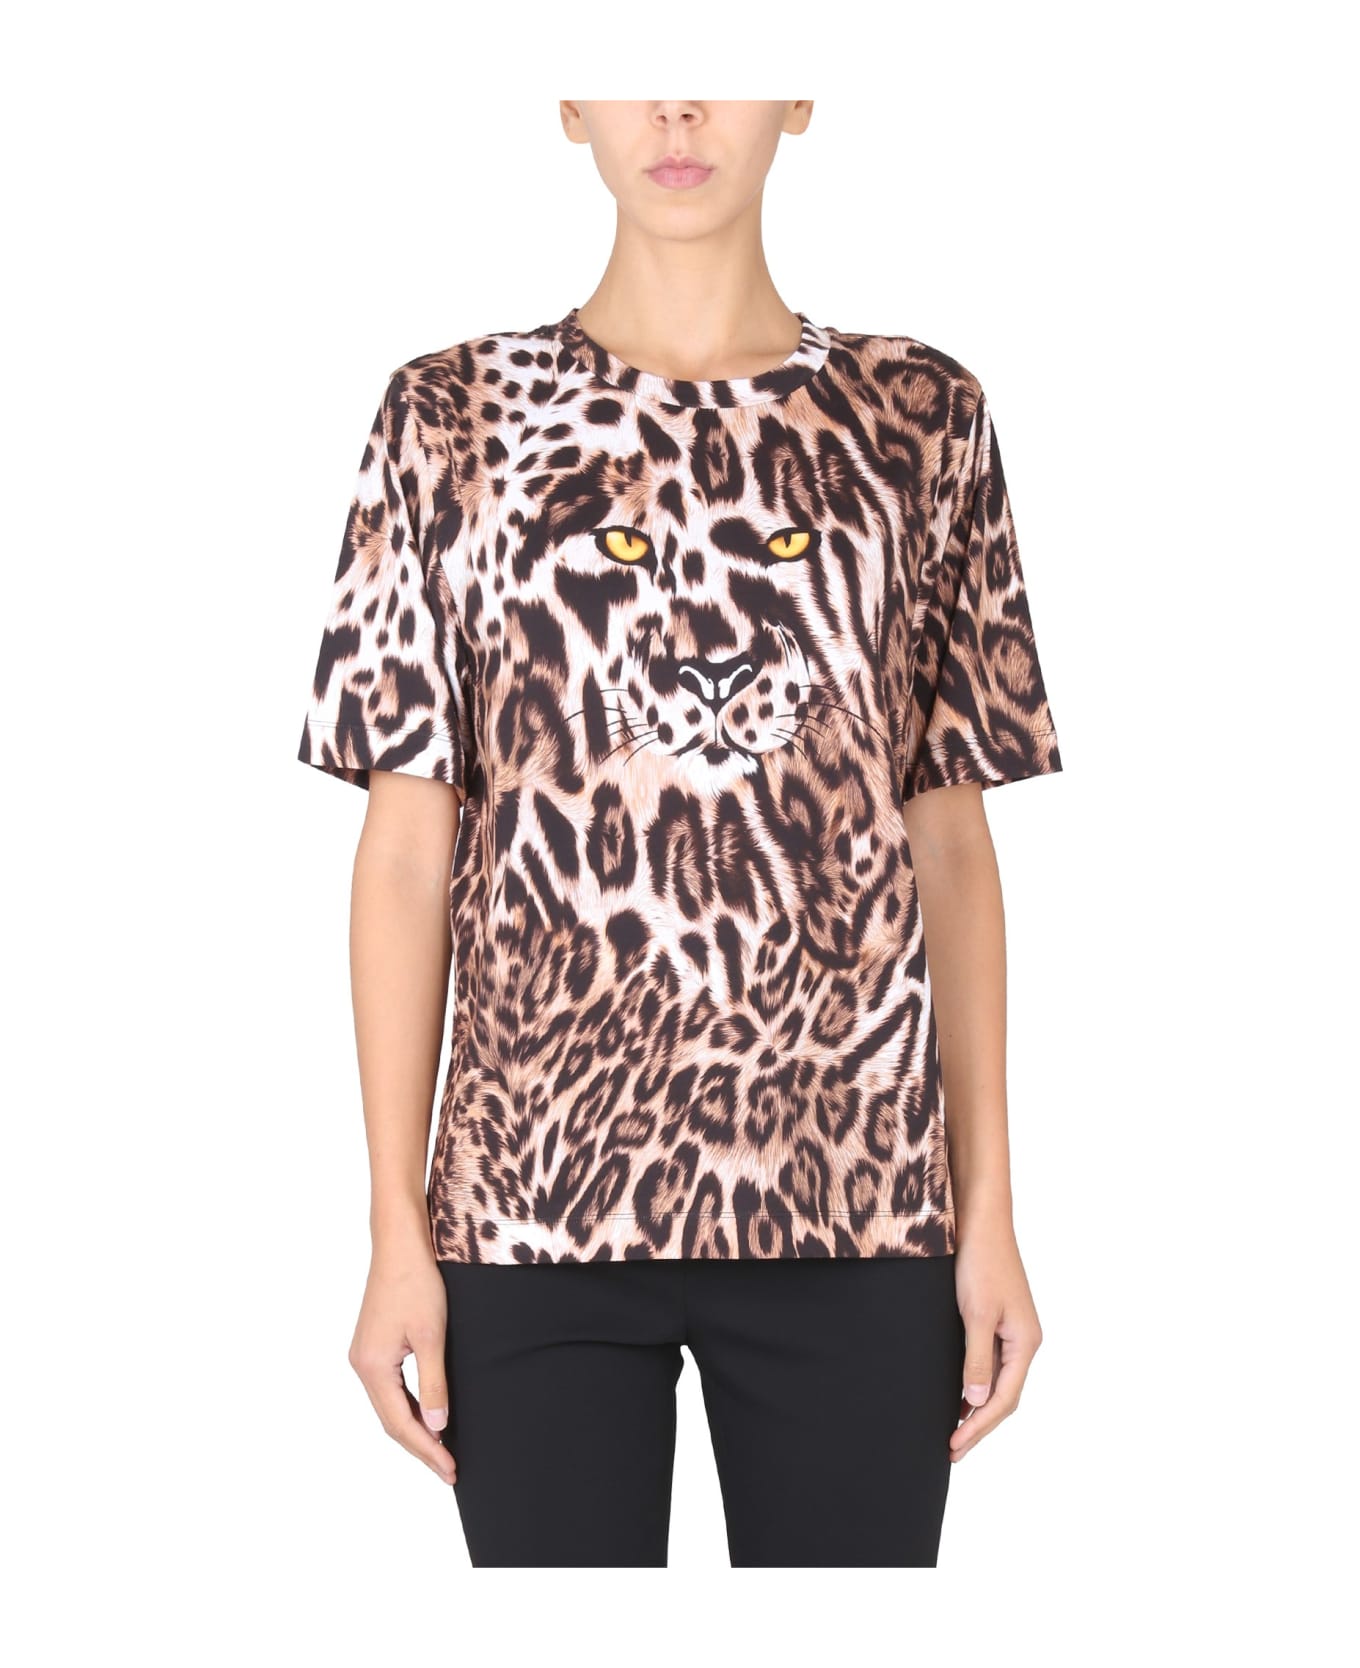 Boutique Moschino Animal Print T-shirt - MULTICOLOR